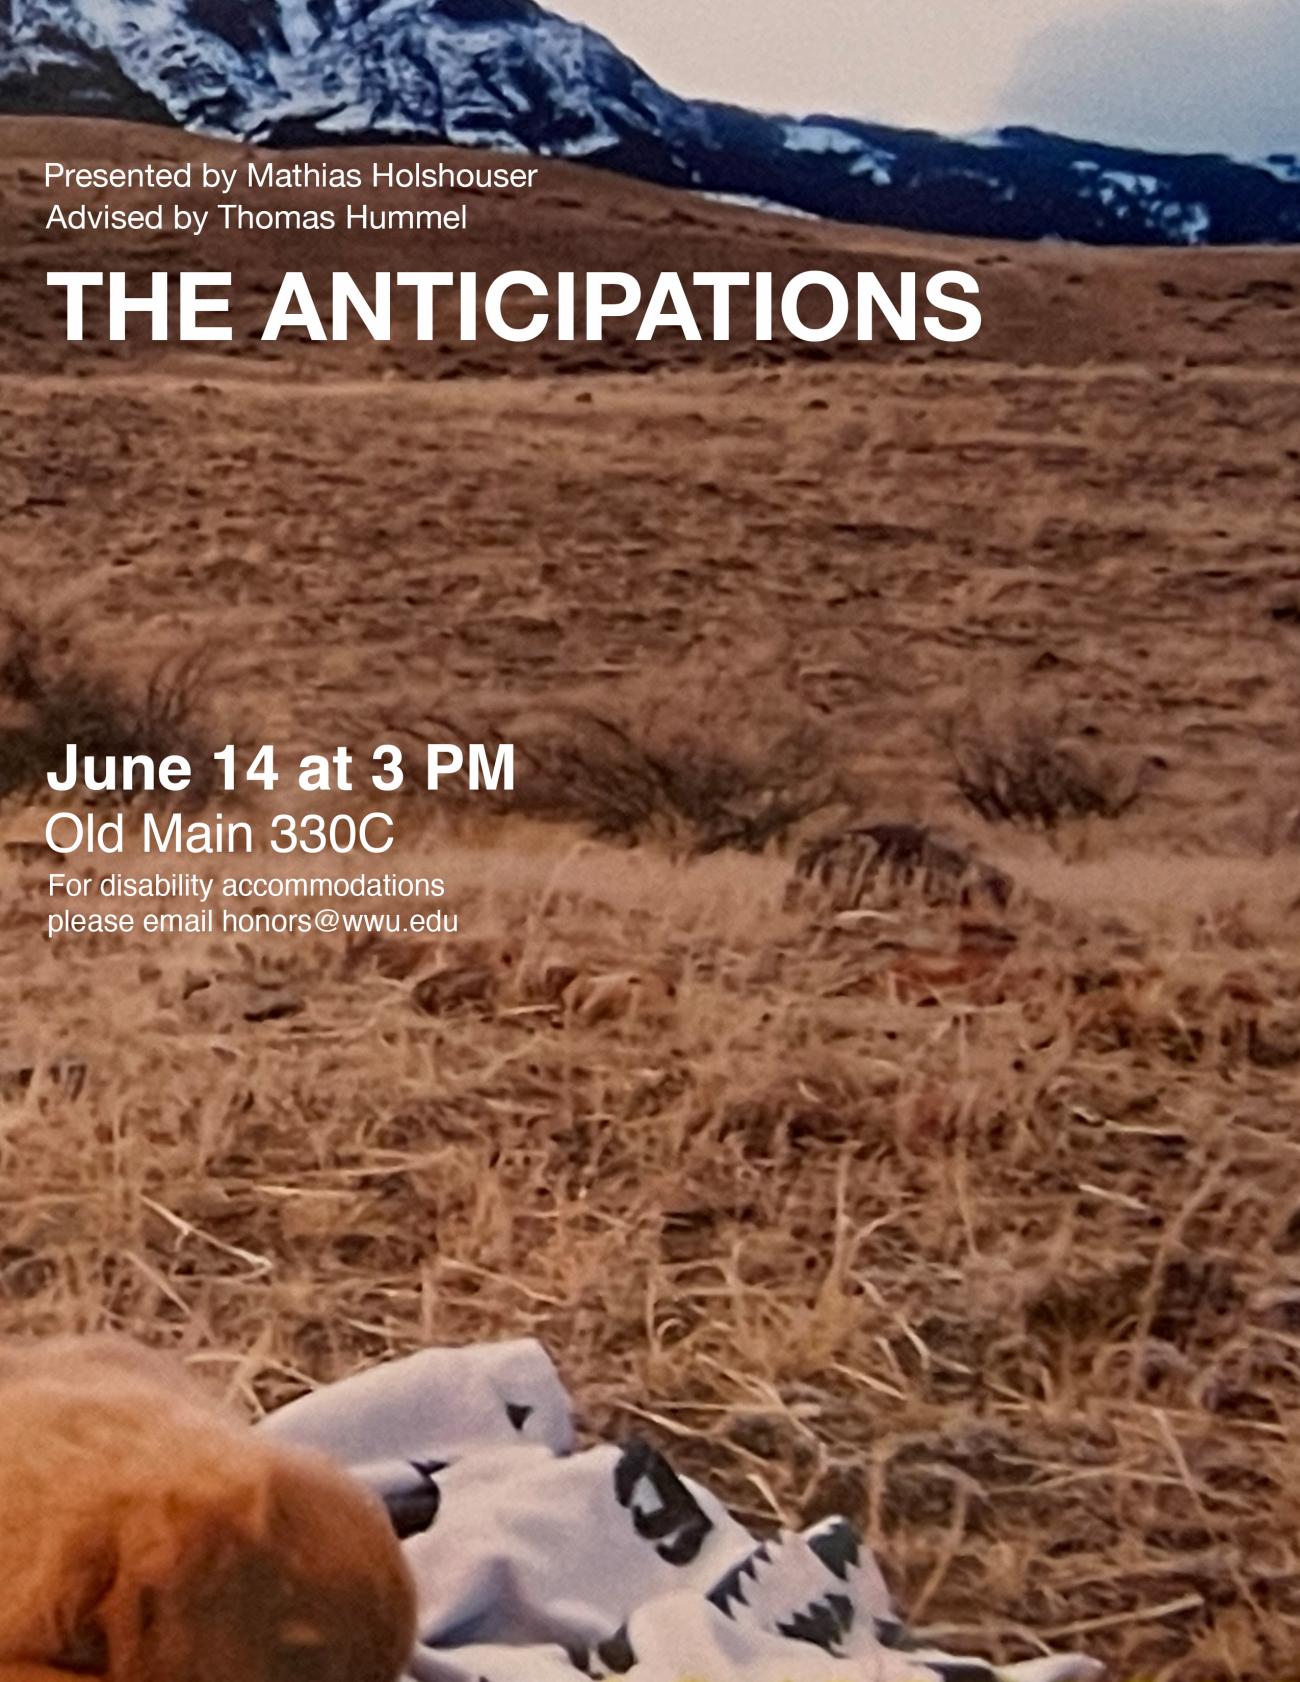 In the background, a photograph of a brown field rising into snowy mountains. In the bottom left corner is a golden retriever puppy on a white blanket. The text reads "The Anticipations. Presented by Mathias Holshouser. Advised by Thomas Hummel. June 14 at 3 PM. Old Main 330C. For disability accommodations please email honors@wwu.edu."